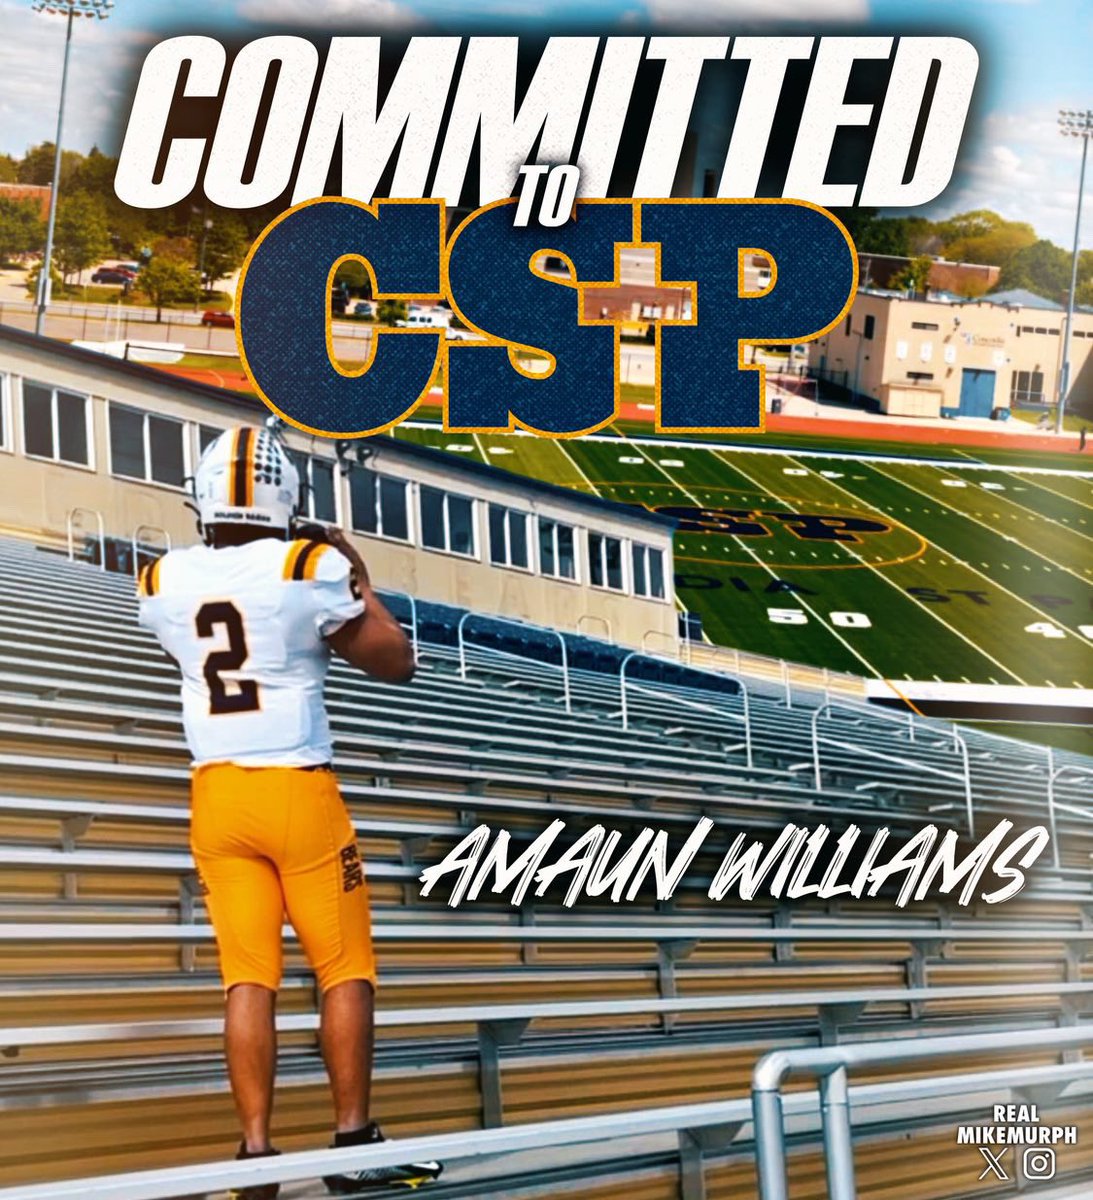 Thankful for it all! A new journey! Let's work. All glory to the man above @bond_coach #goldenbears #letsgo